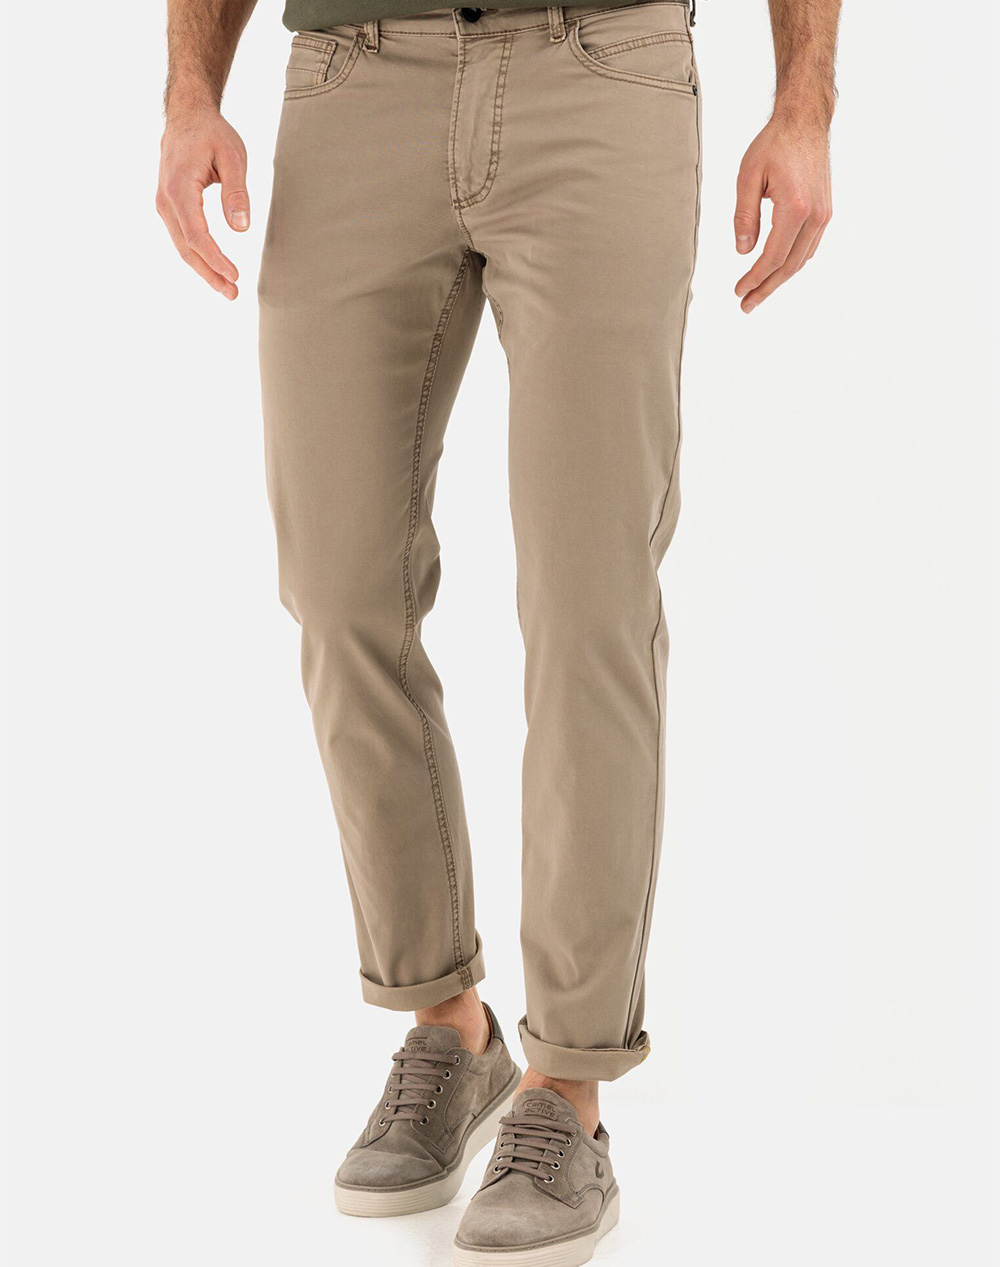 CELIO Textured Slim Tapered Casual Trousers  Lifestyle Stores   Khairatabad  Hyderabad